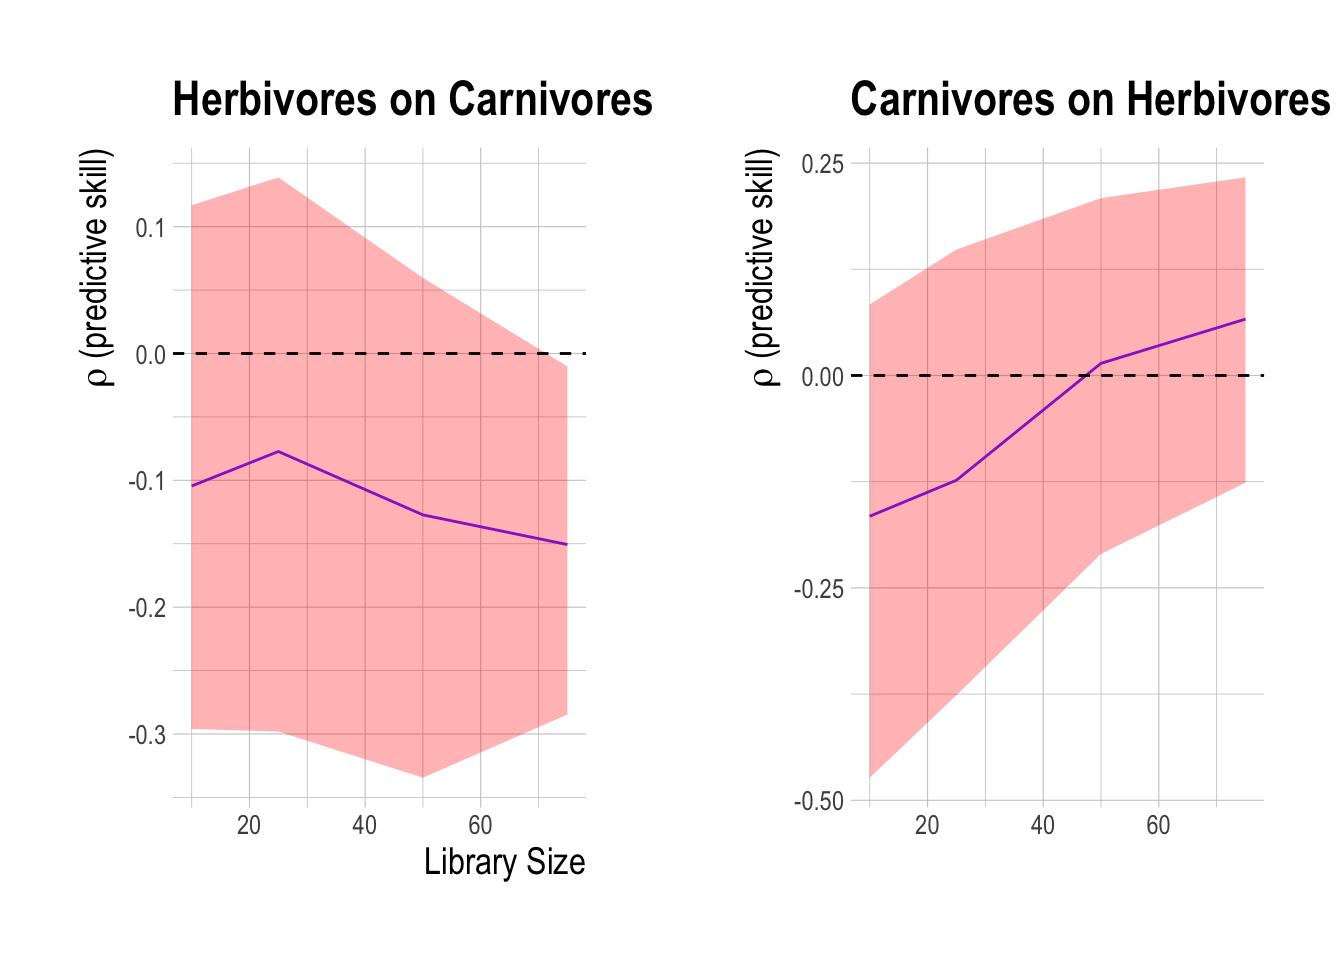 Cross mapping of effect of herbivores on carnivores (A) and carnivores on herbivores (B) in the PISCO data from 2000 to 2017. Shaded region show 95% confidence interval